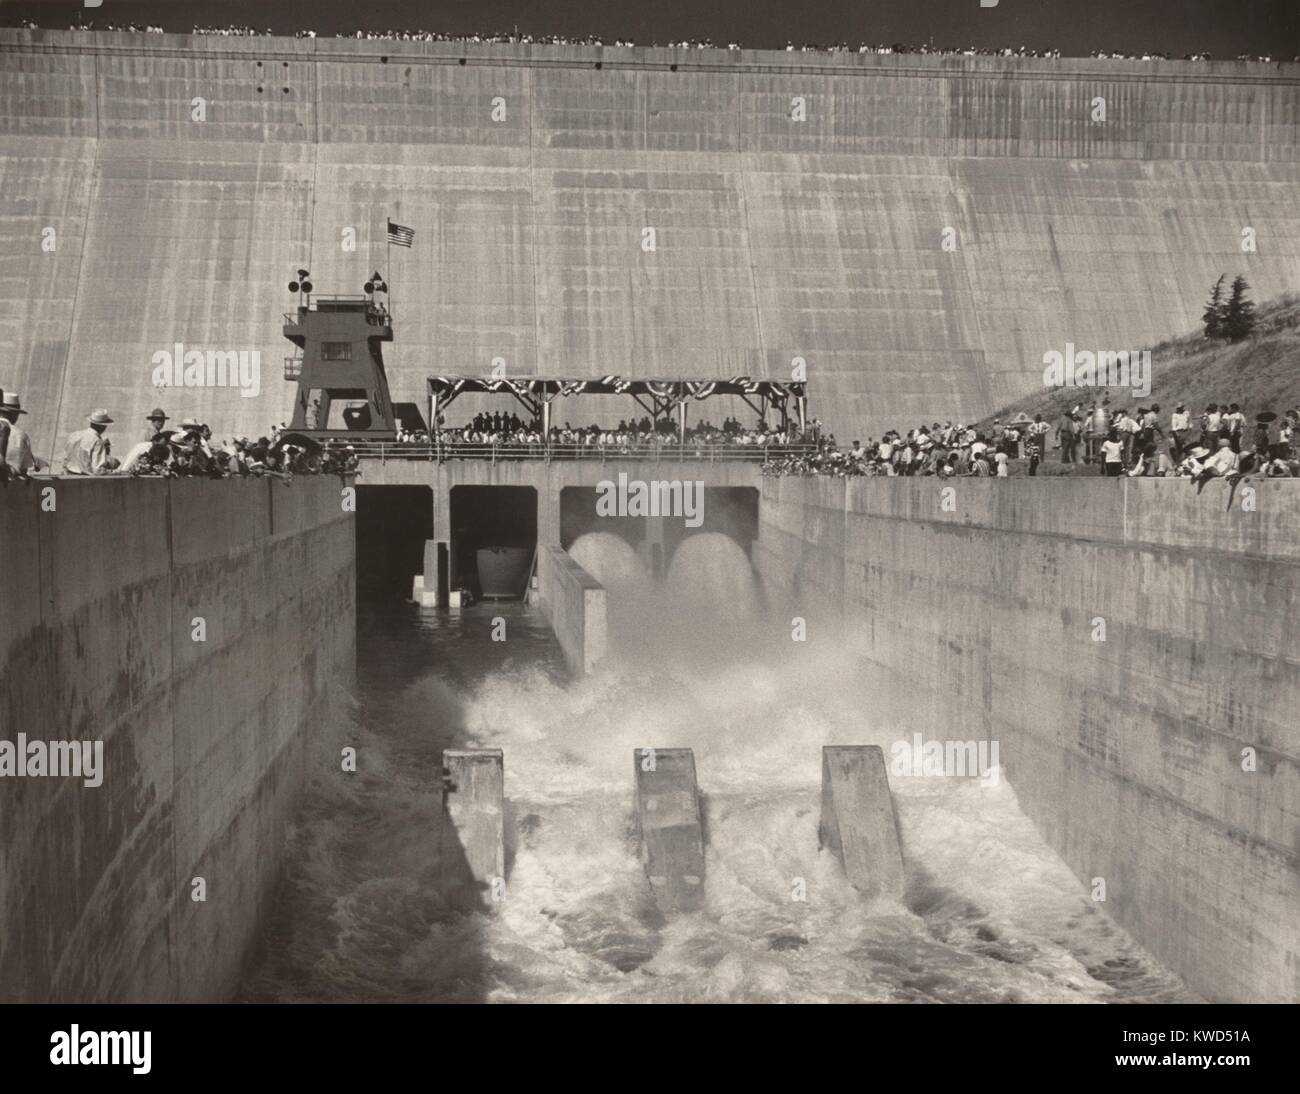 Official opening of the partially completed Friant-Kern Canal, July 9, 1949. When completed the canal would irrigate 600,000 acres of arid land in the central valley of southern California. Spectators lined on both sides and are along top of wall in the background. July 9, 1949. (BSLOC_2014_13_228) Stock Photo